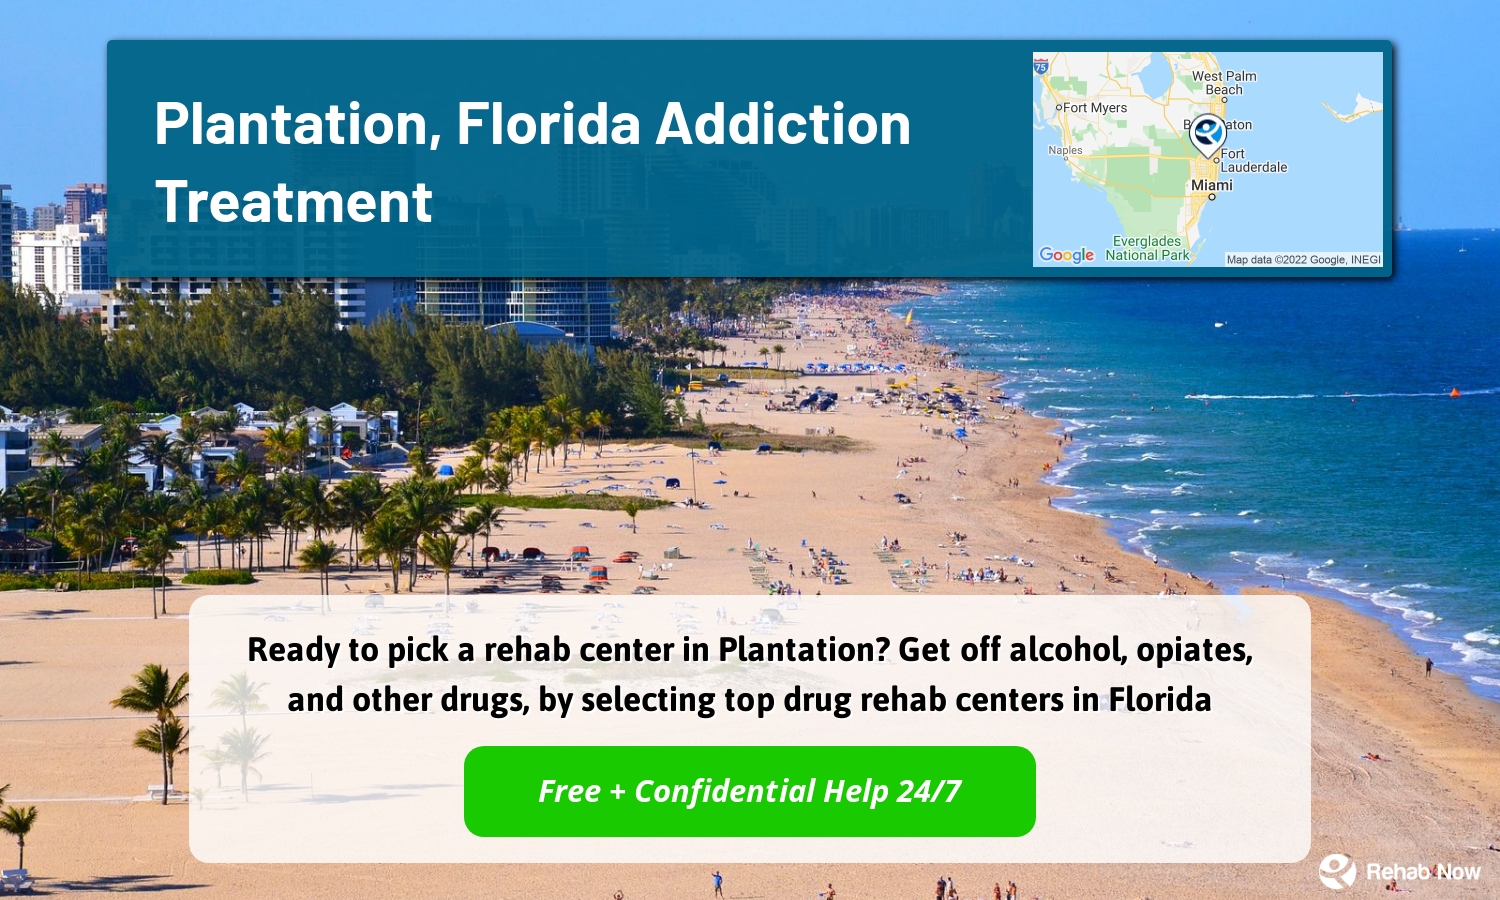 Ready to pick a rehab center in Plantation? Get off alcohol, opiates, and other drugs, by selecting top drug rehab centers in Florida